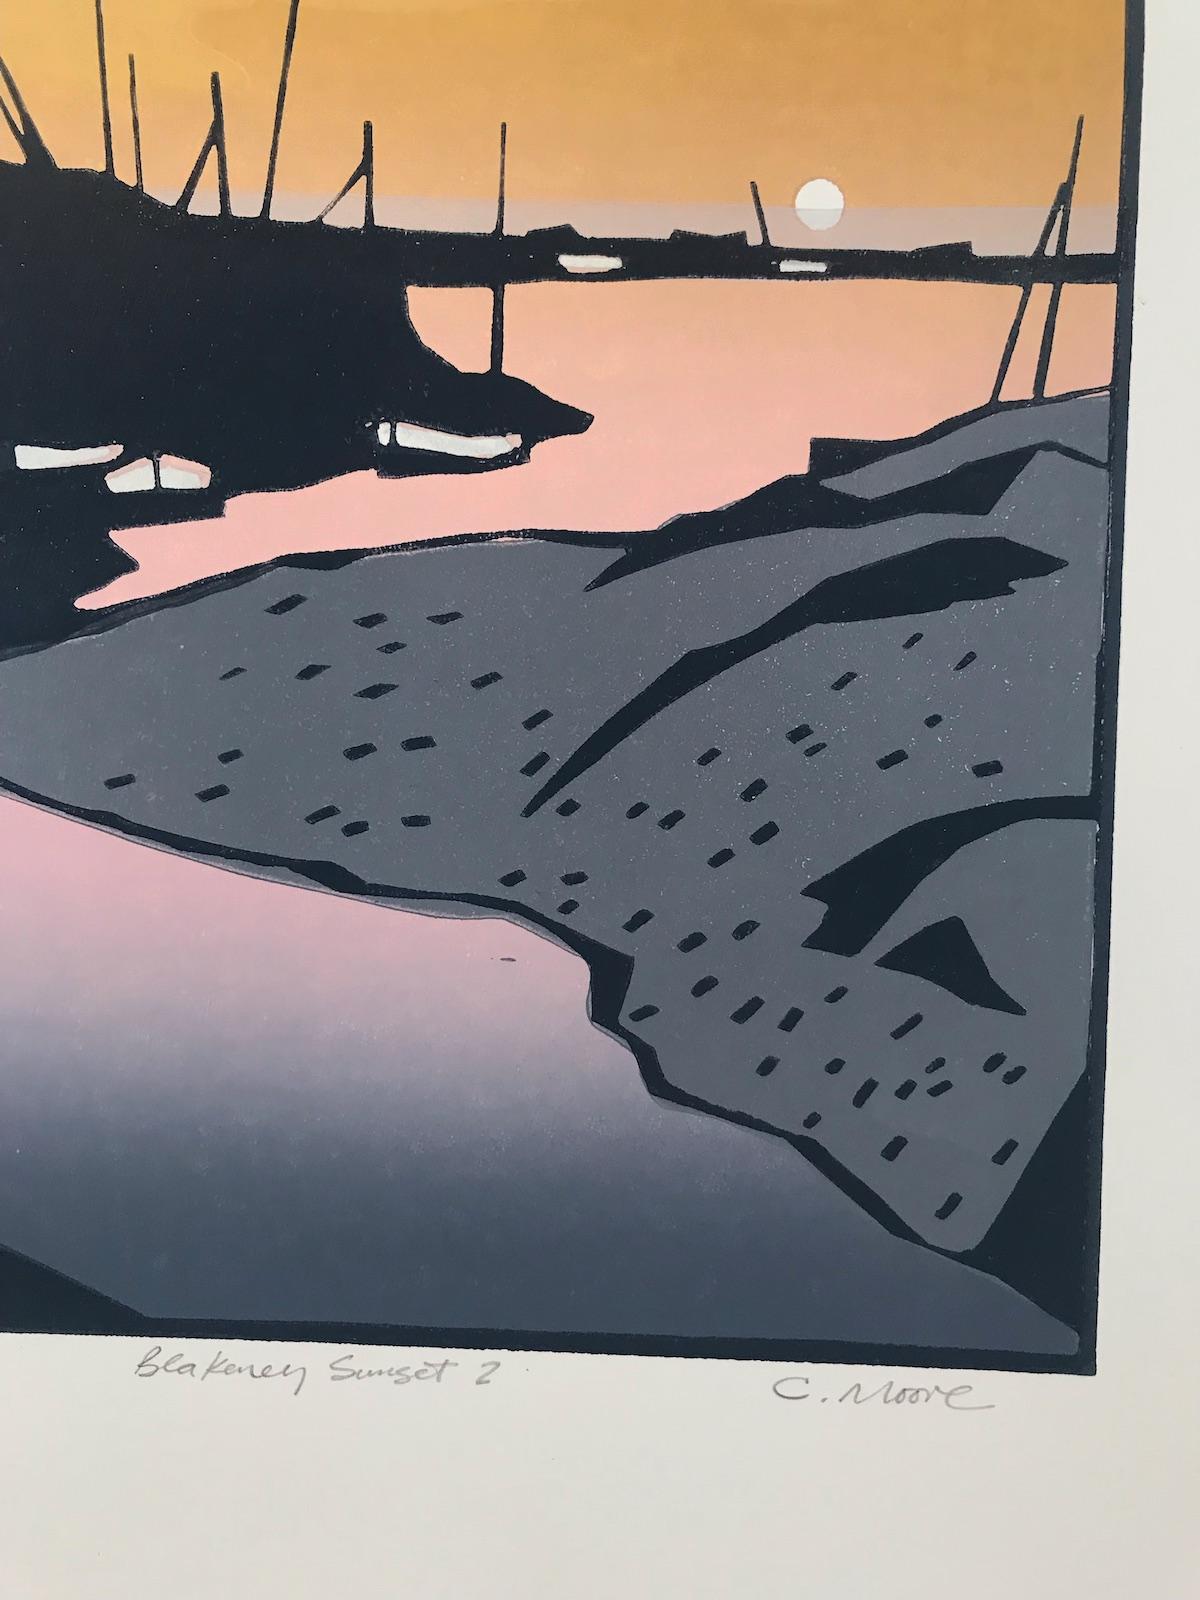 Blakeney Sunset 2 with Linocut Print on Paper by Colin Moore For Sale 4